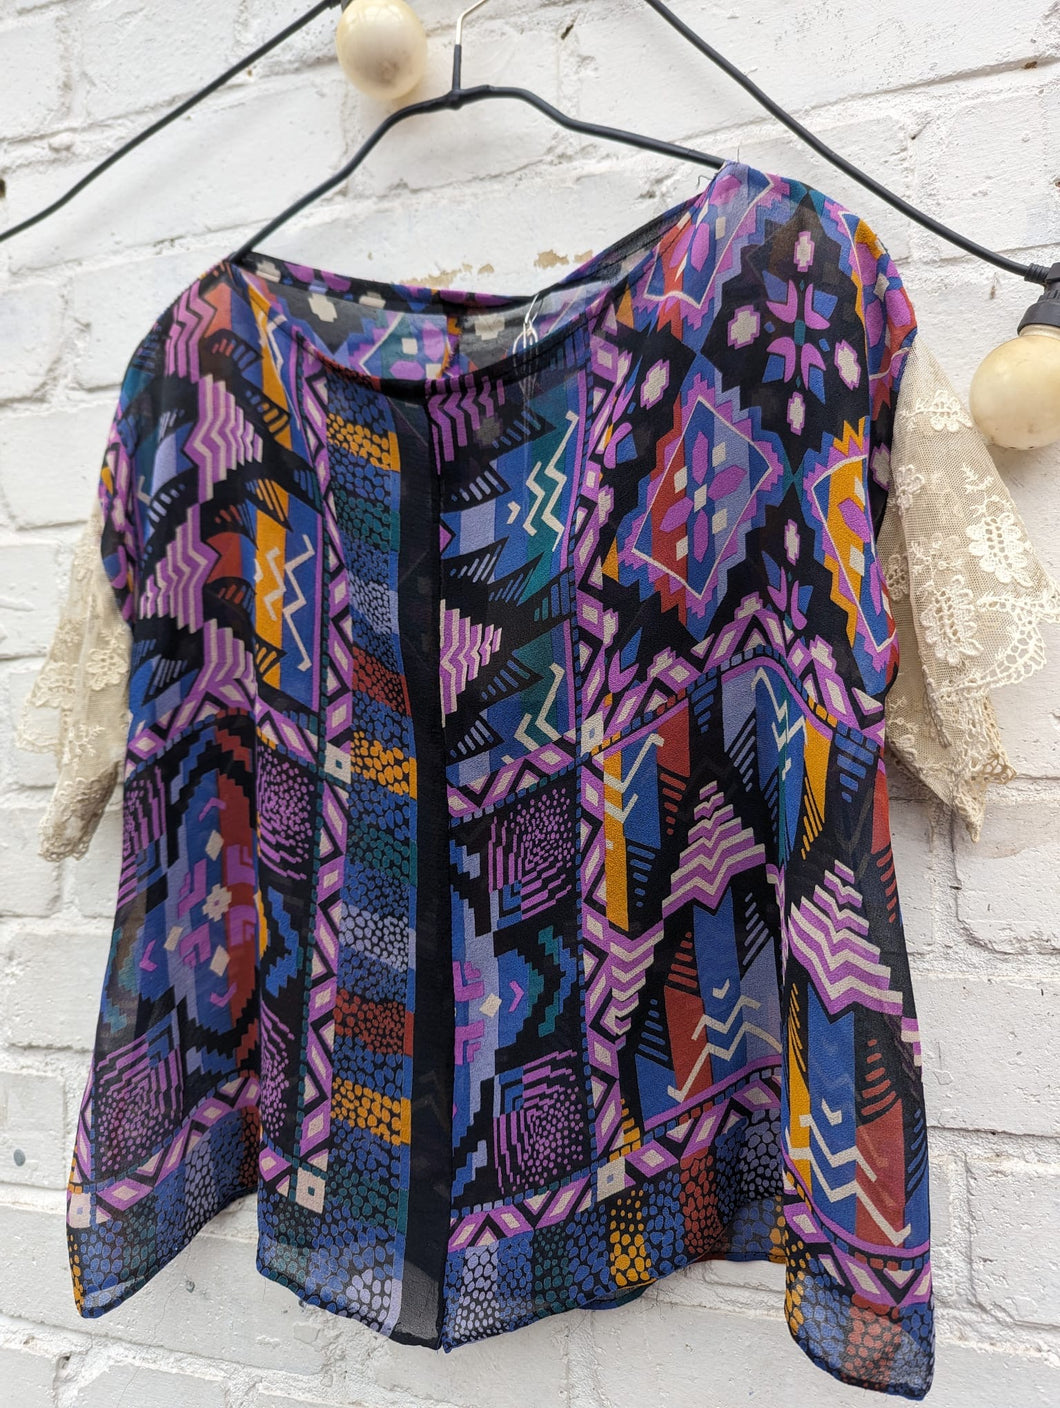 Unusual colourful 1930's silk print top with lace sleeves